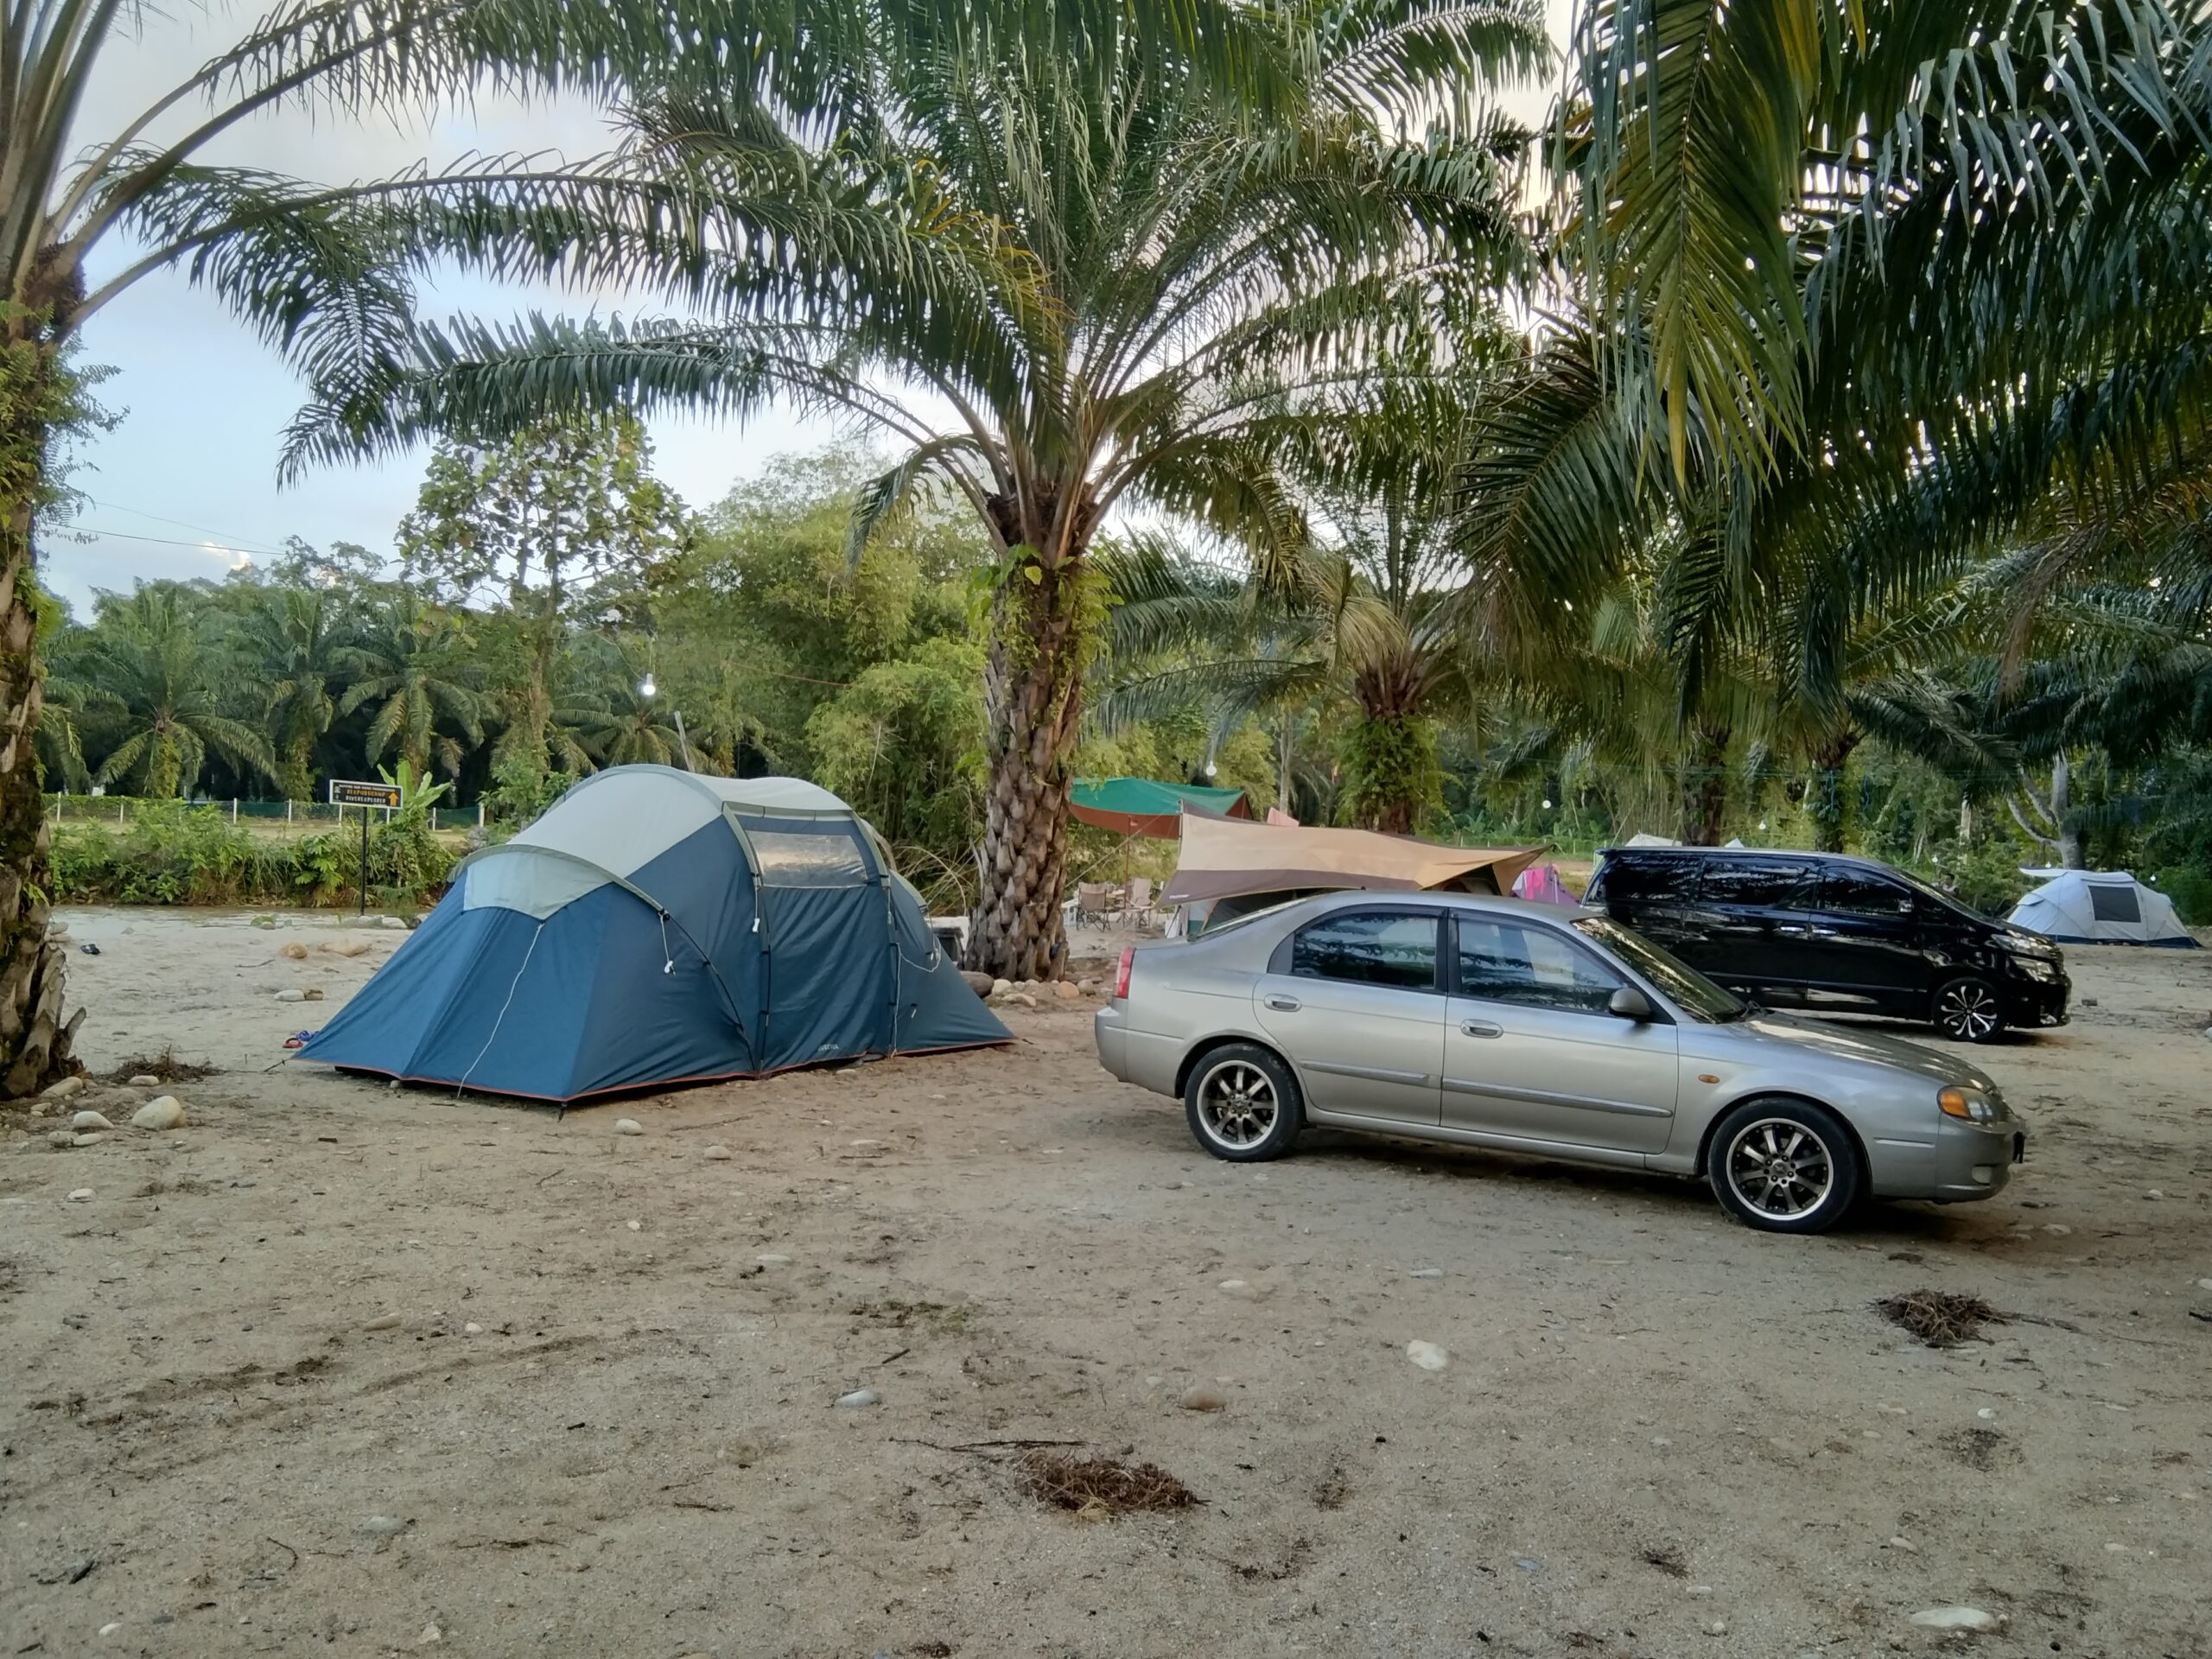 can park near tents